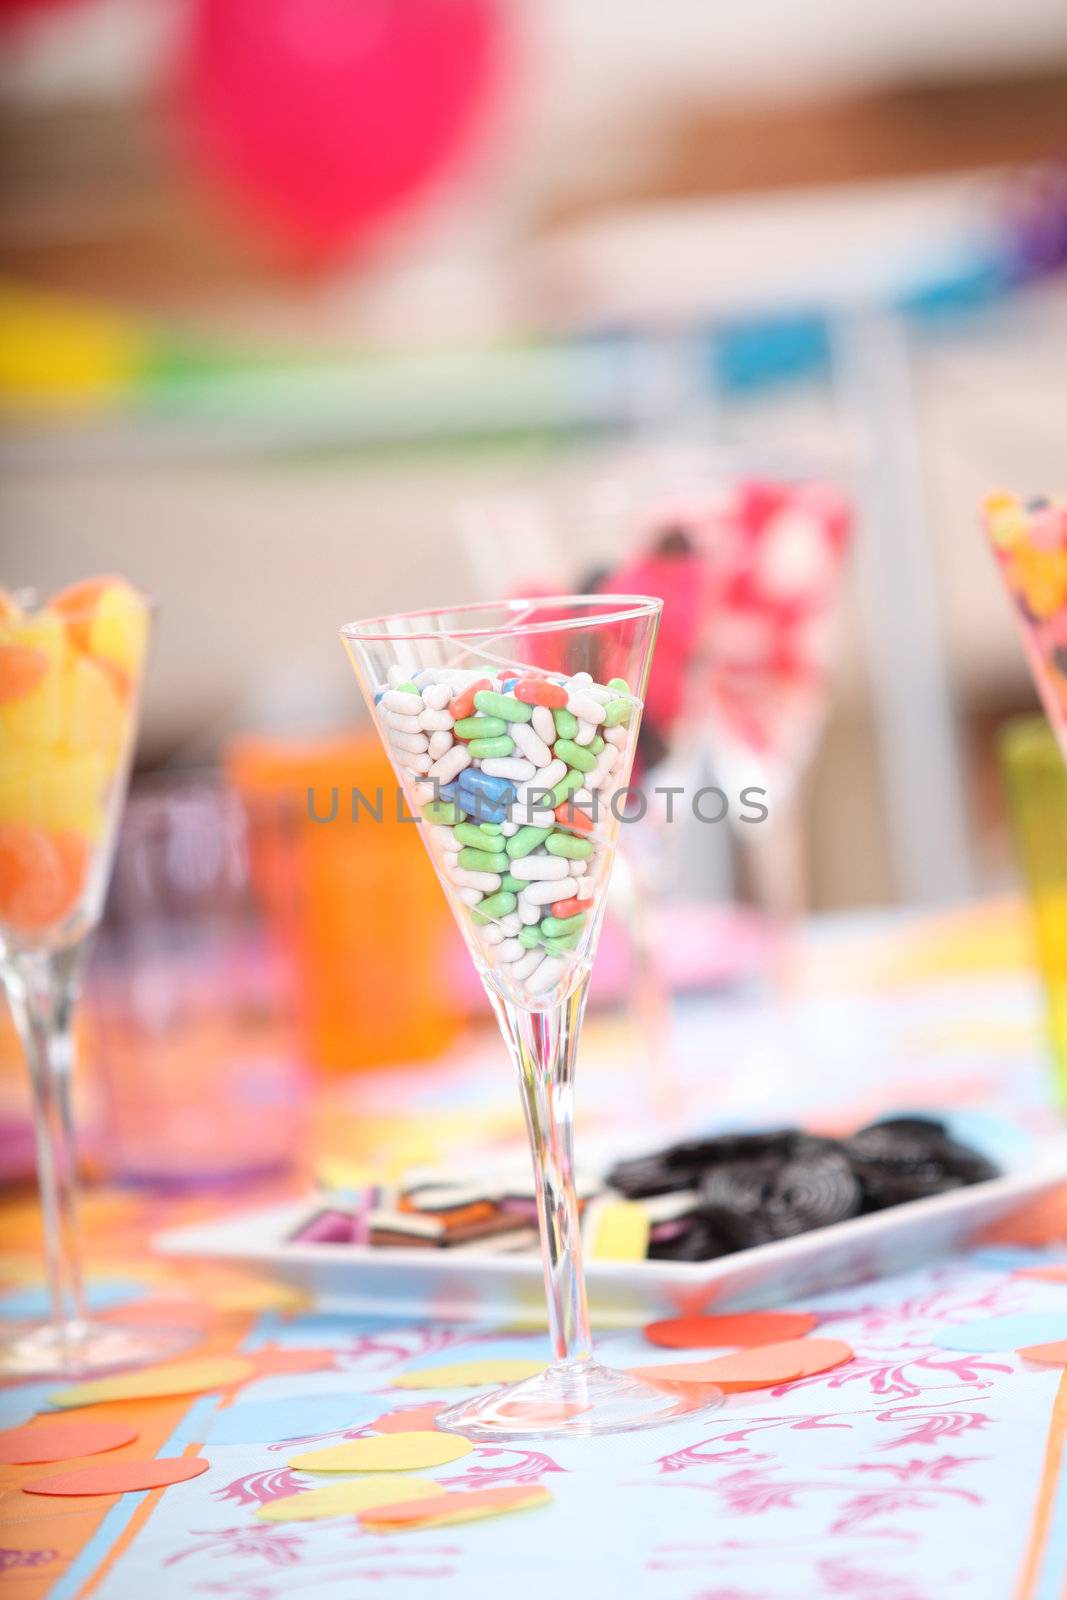 Glasses of sweets at a child's birthday party by phovoir